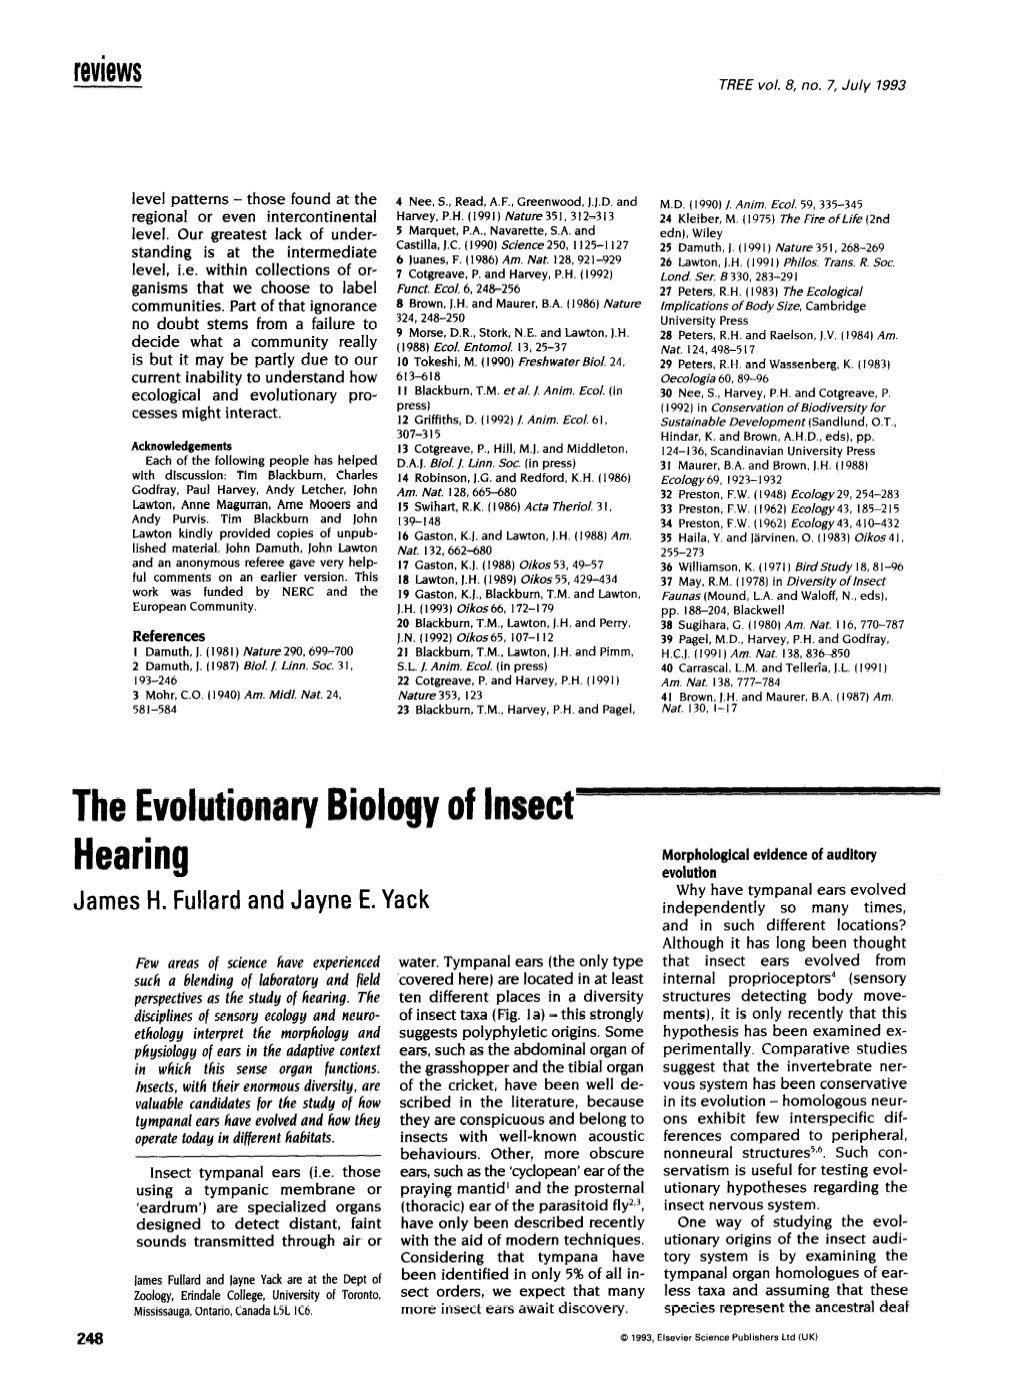 The Evolutionary Biology of Insect Hearing